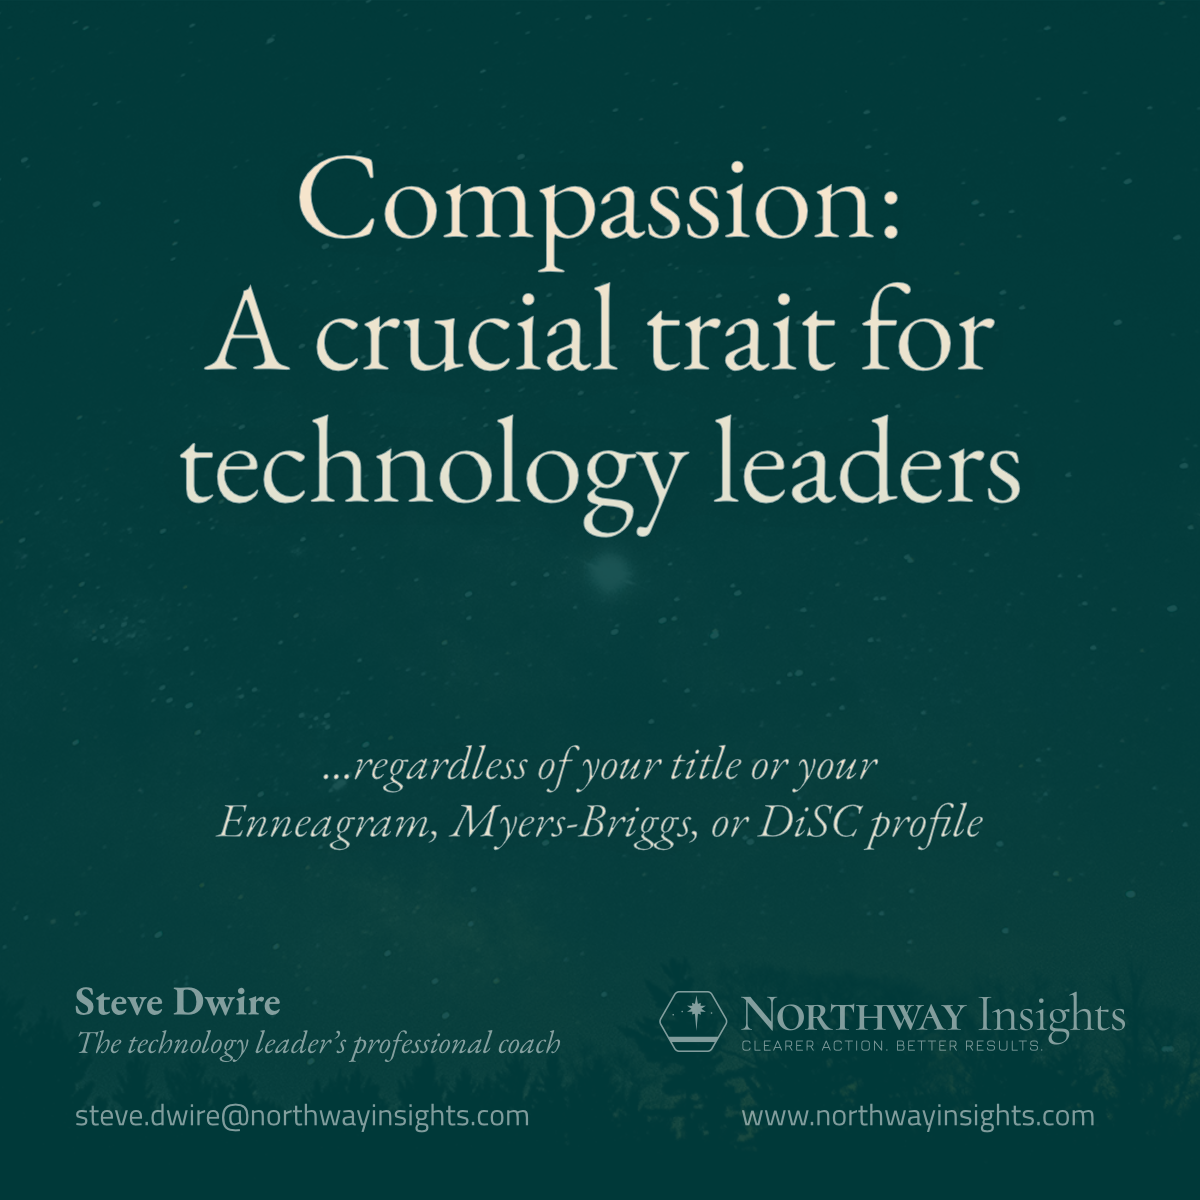 Compassion: A crucial trait for technology leaders ... regardless of your title or your Enneagram, Myers-Briggs, or DiSC profile